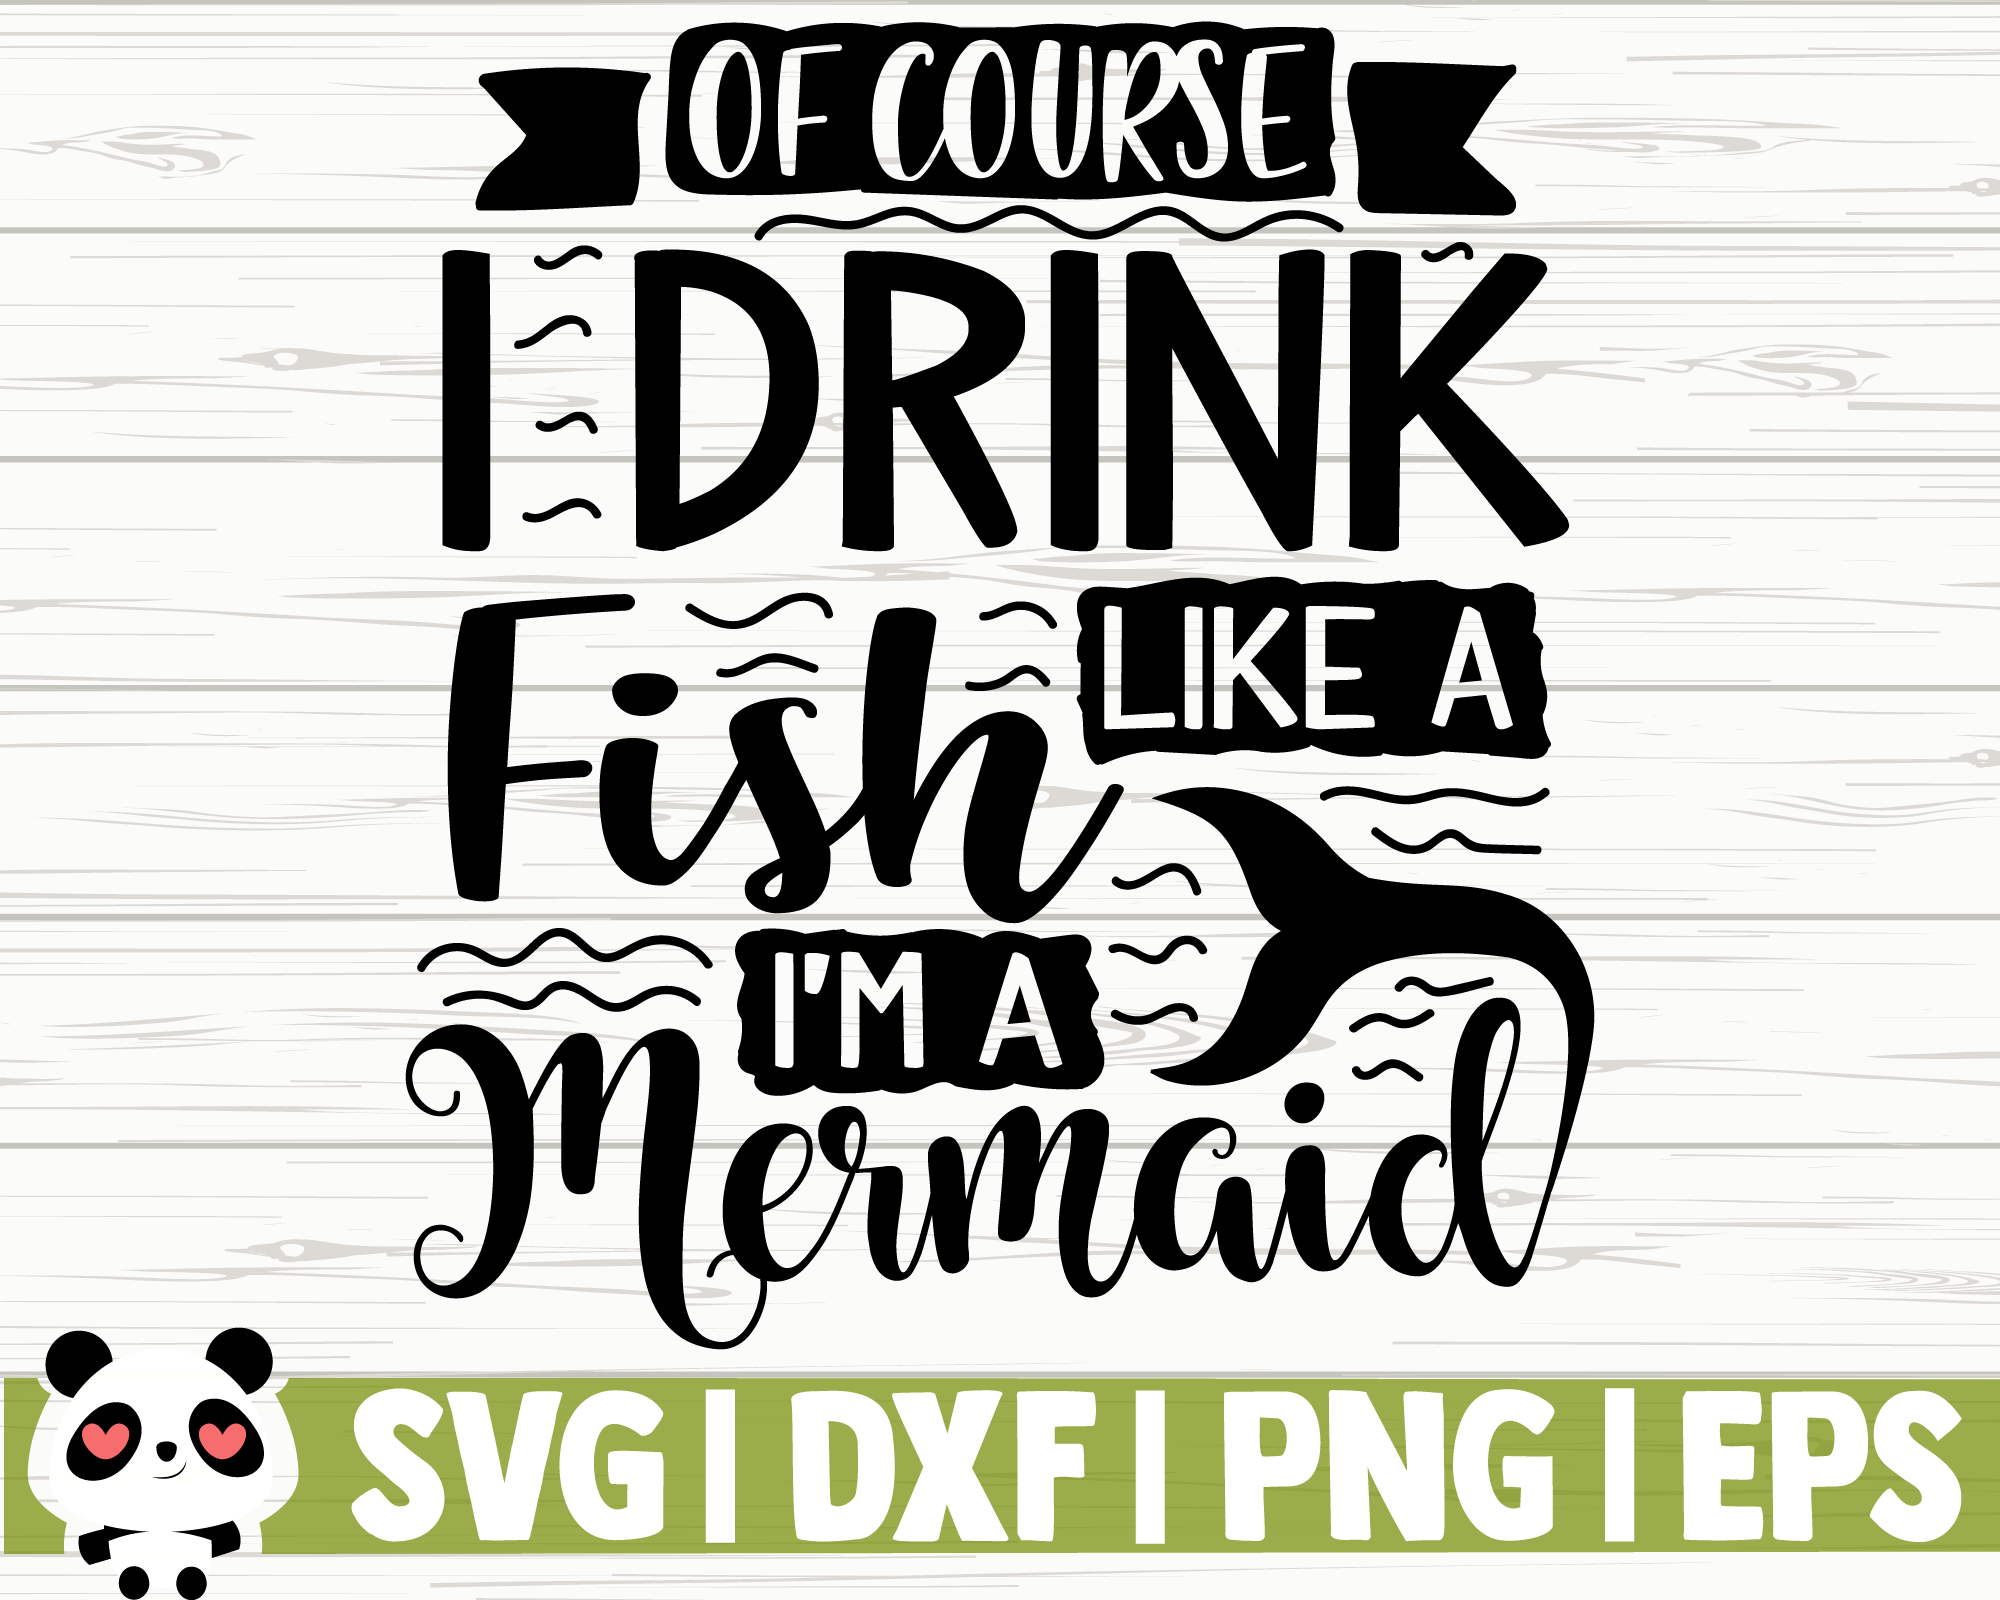 Download Clip Art Svg File Of Course I Drink Like A Fish Digital Instant Download Hat I M A Mermaid U2022 Summer Adult Drinking Diy Shirt Decals Art Collectibles